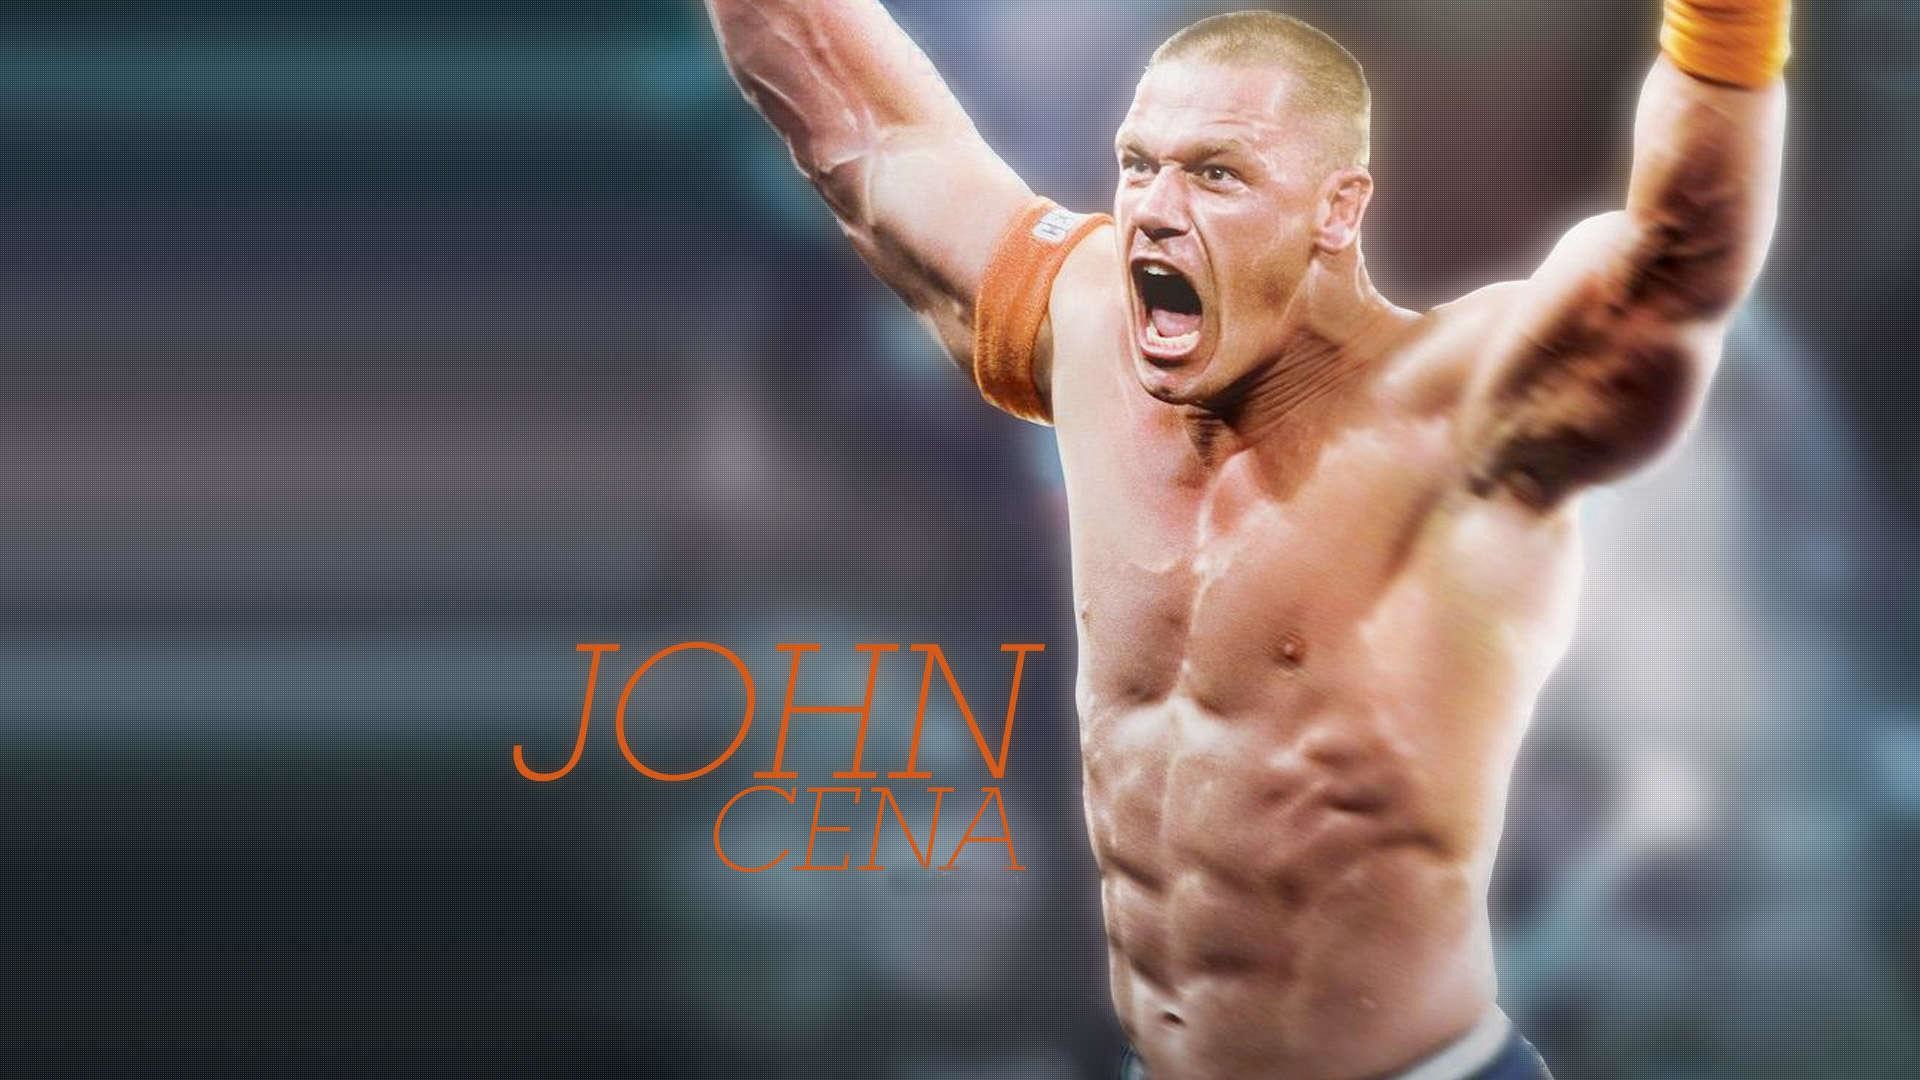 Tag John Cena  Download HD Wallpapers and Free Images